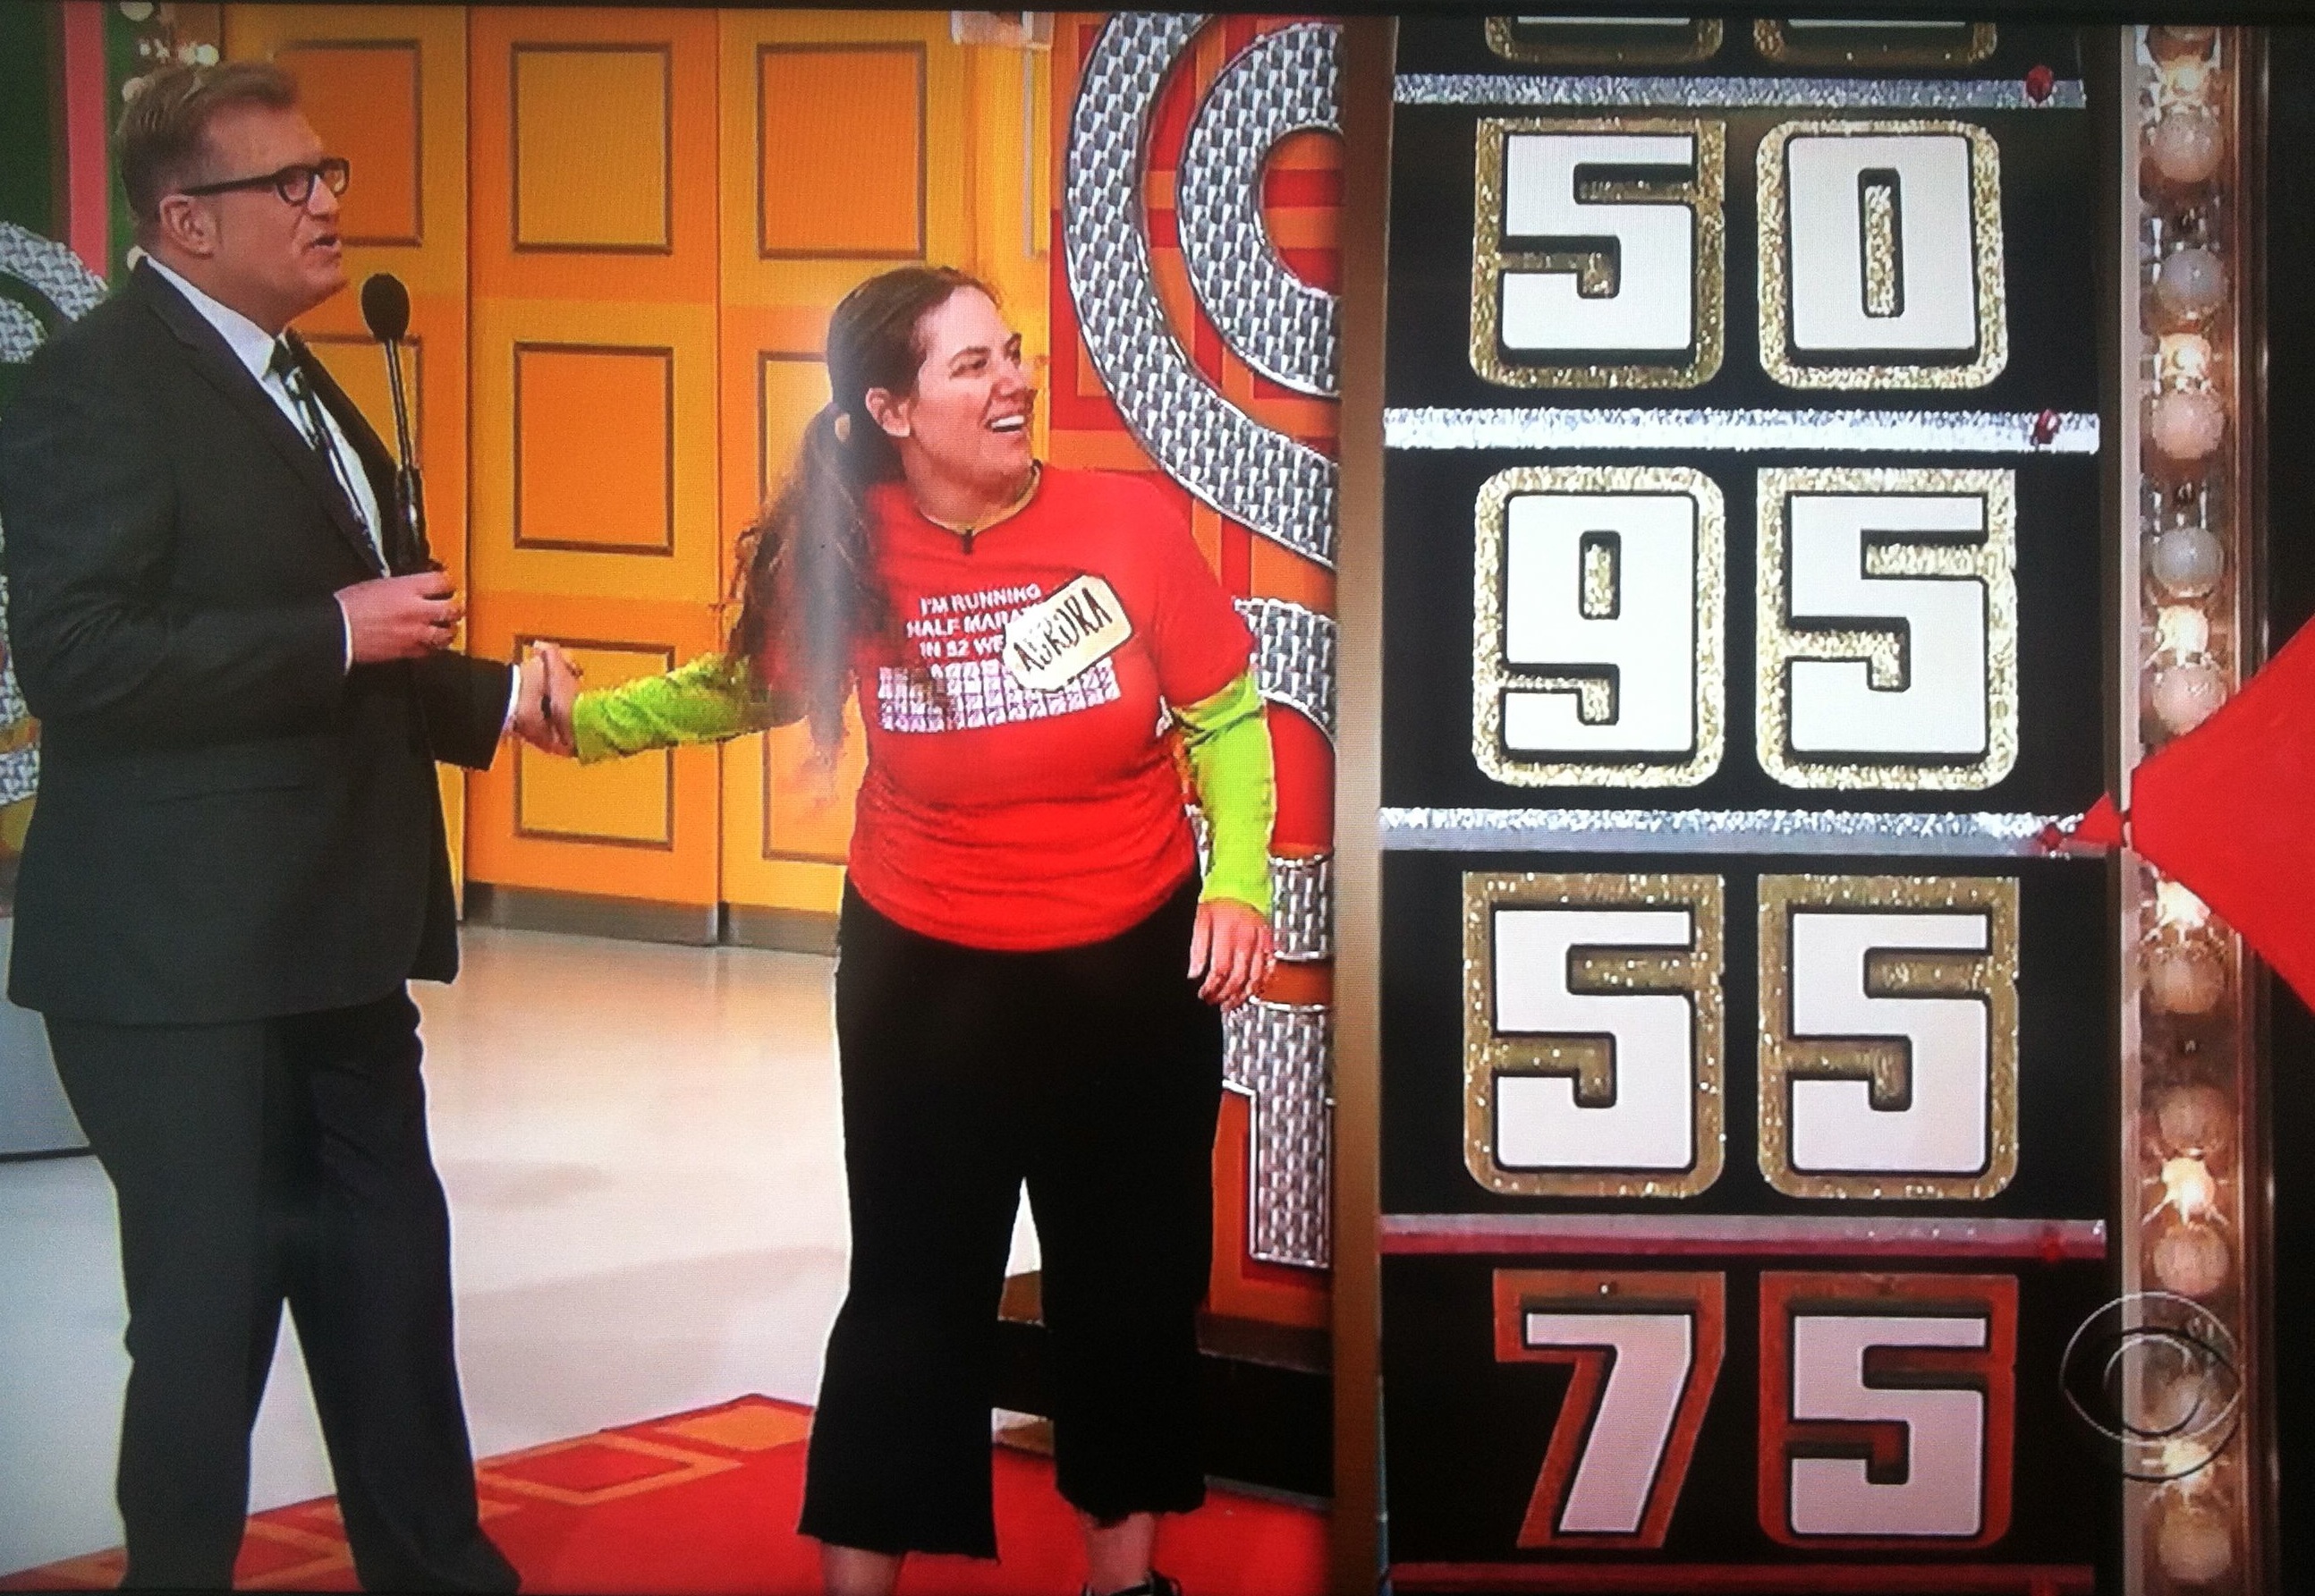 Drew Carey and Aurora seeing that the wheel had almost landed on 95 on The Price is Right